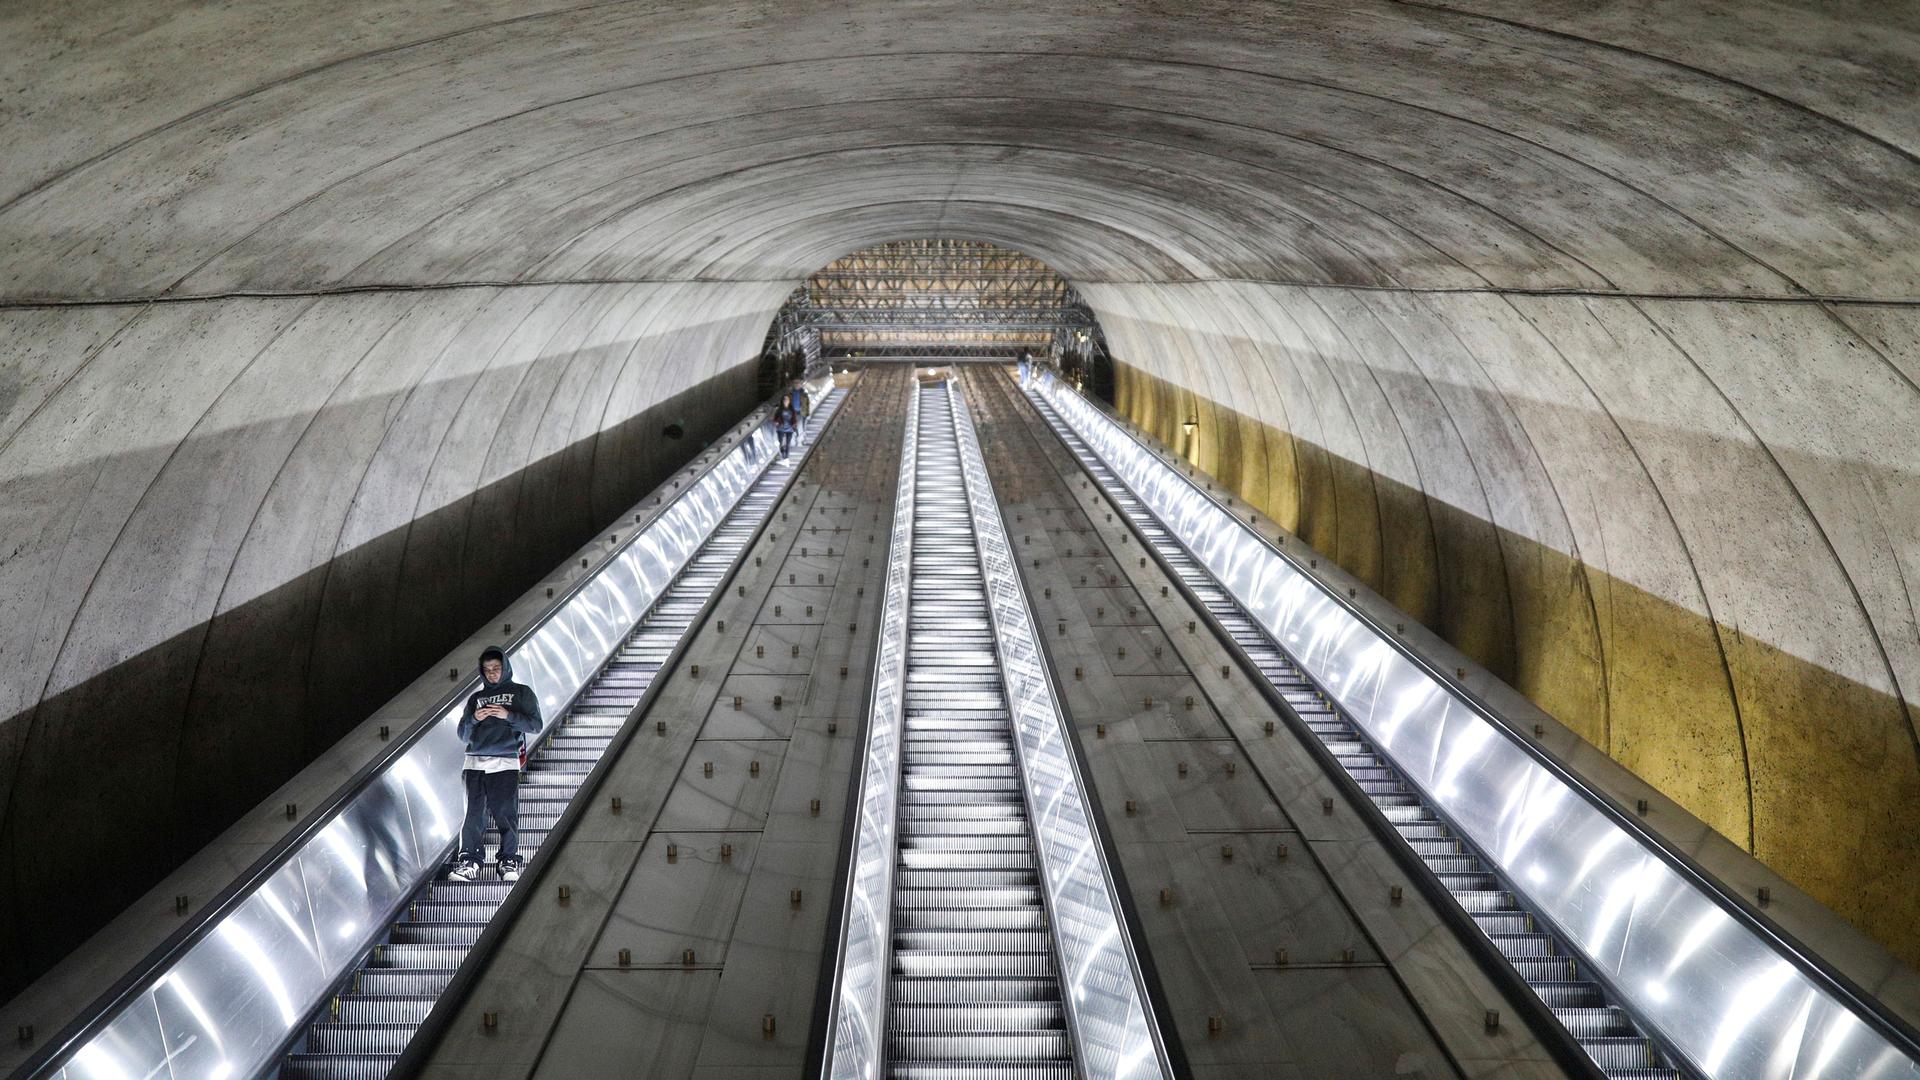 A long escalator is shown nearly empty with a person riding down and looking at their phone.